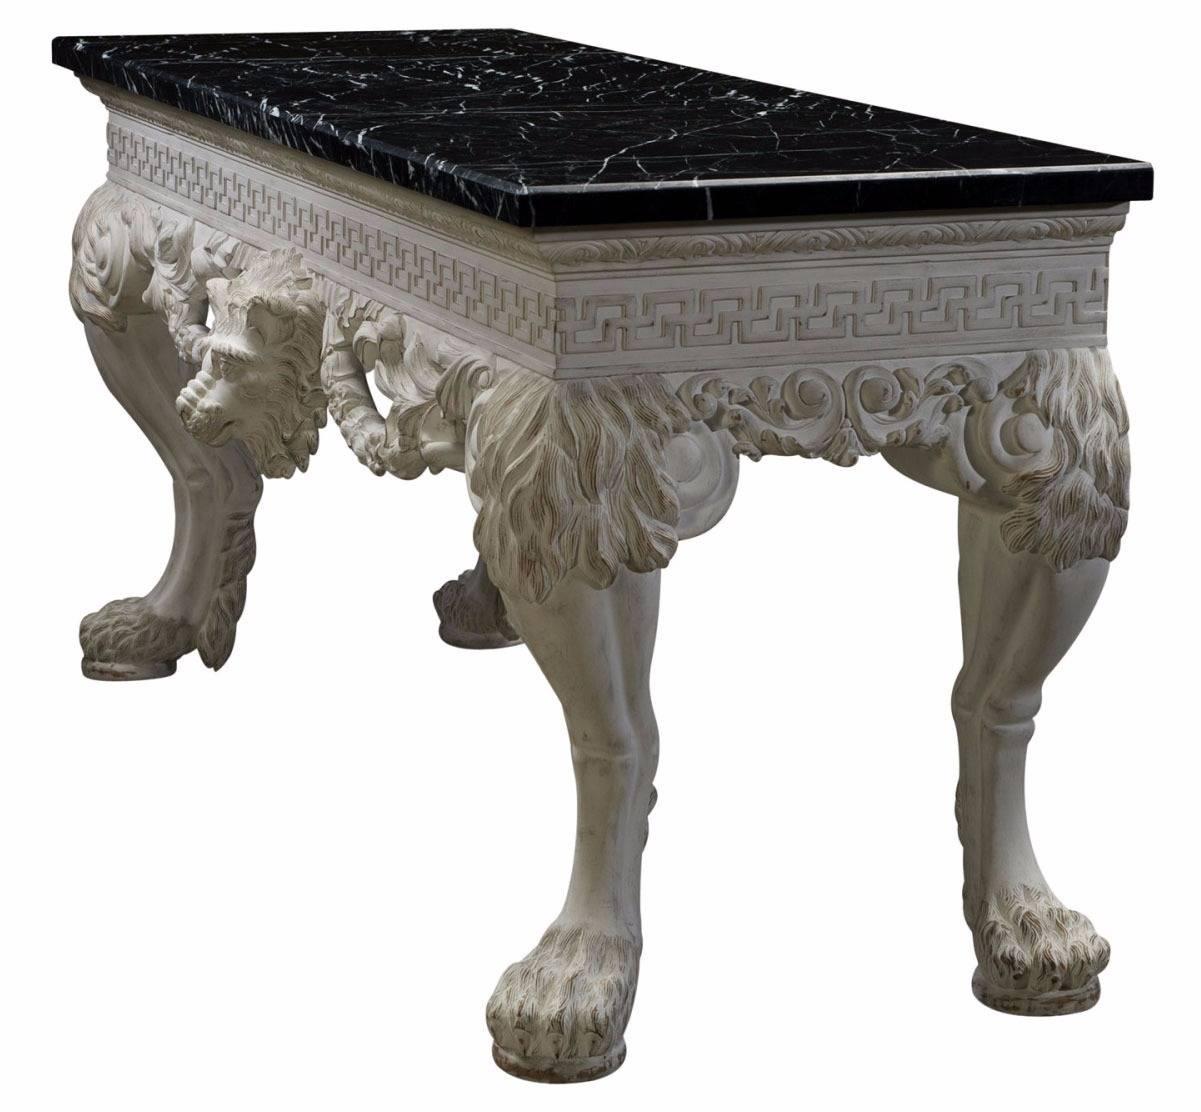 A magnificent and finely carved and white painted console table, the veined black marble top above a Greek key carved frieze with a central lion head and leafy swags below, the bold naturalistic hairy lion legs with paw and disc feet. The original